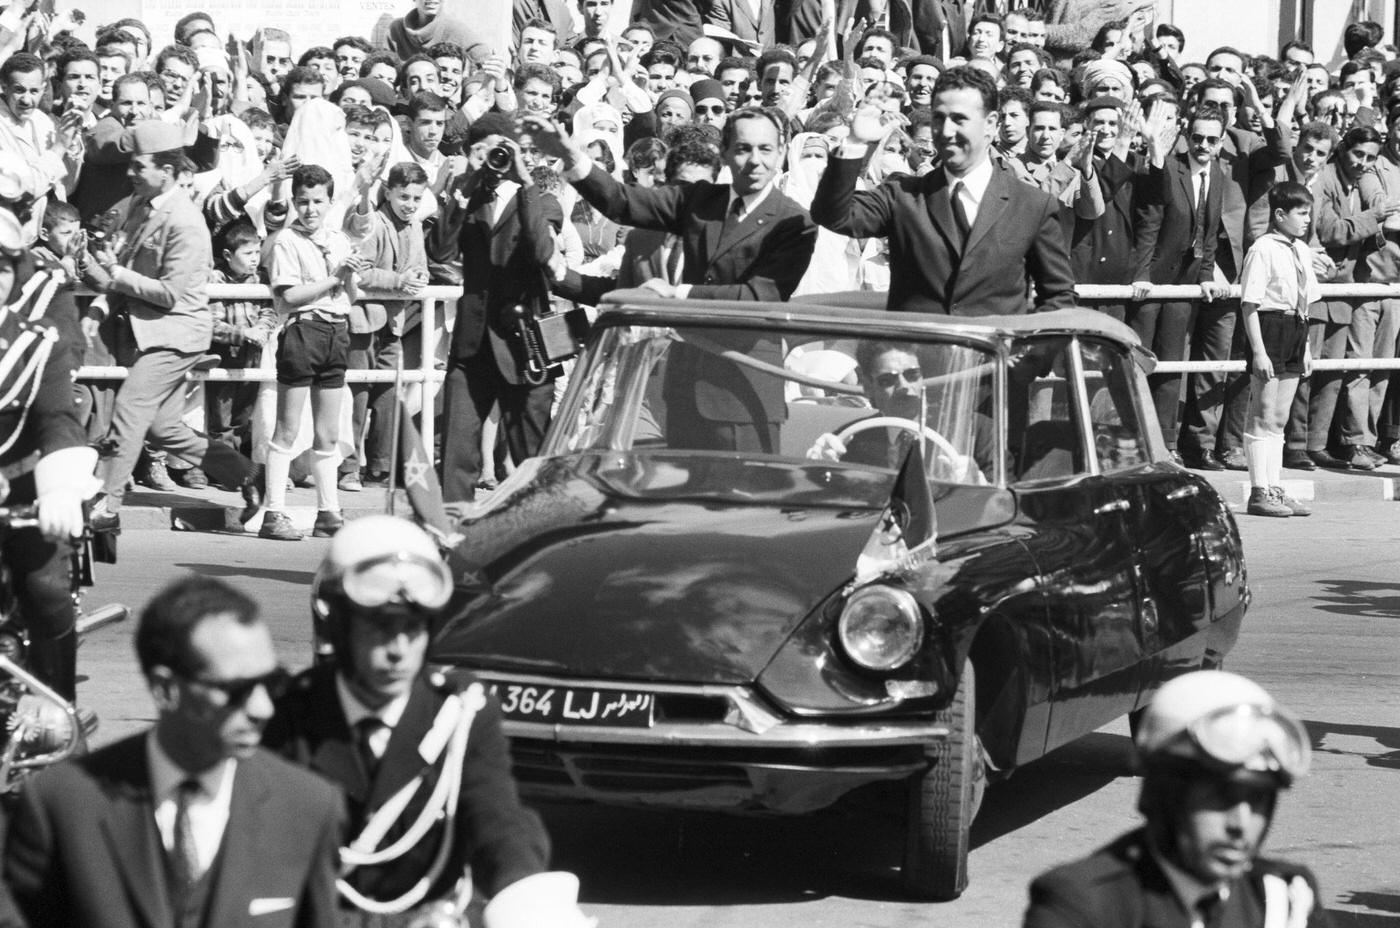 King Hassan II of Morocco and Ahmed Ben Bella, the first president of the Democratic and Popular Republic of Algeria, in a black convertible Citroën DS, 1963.